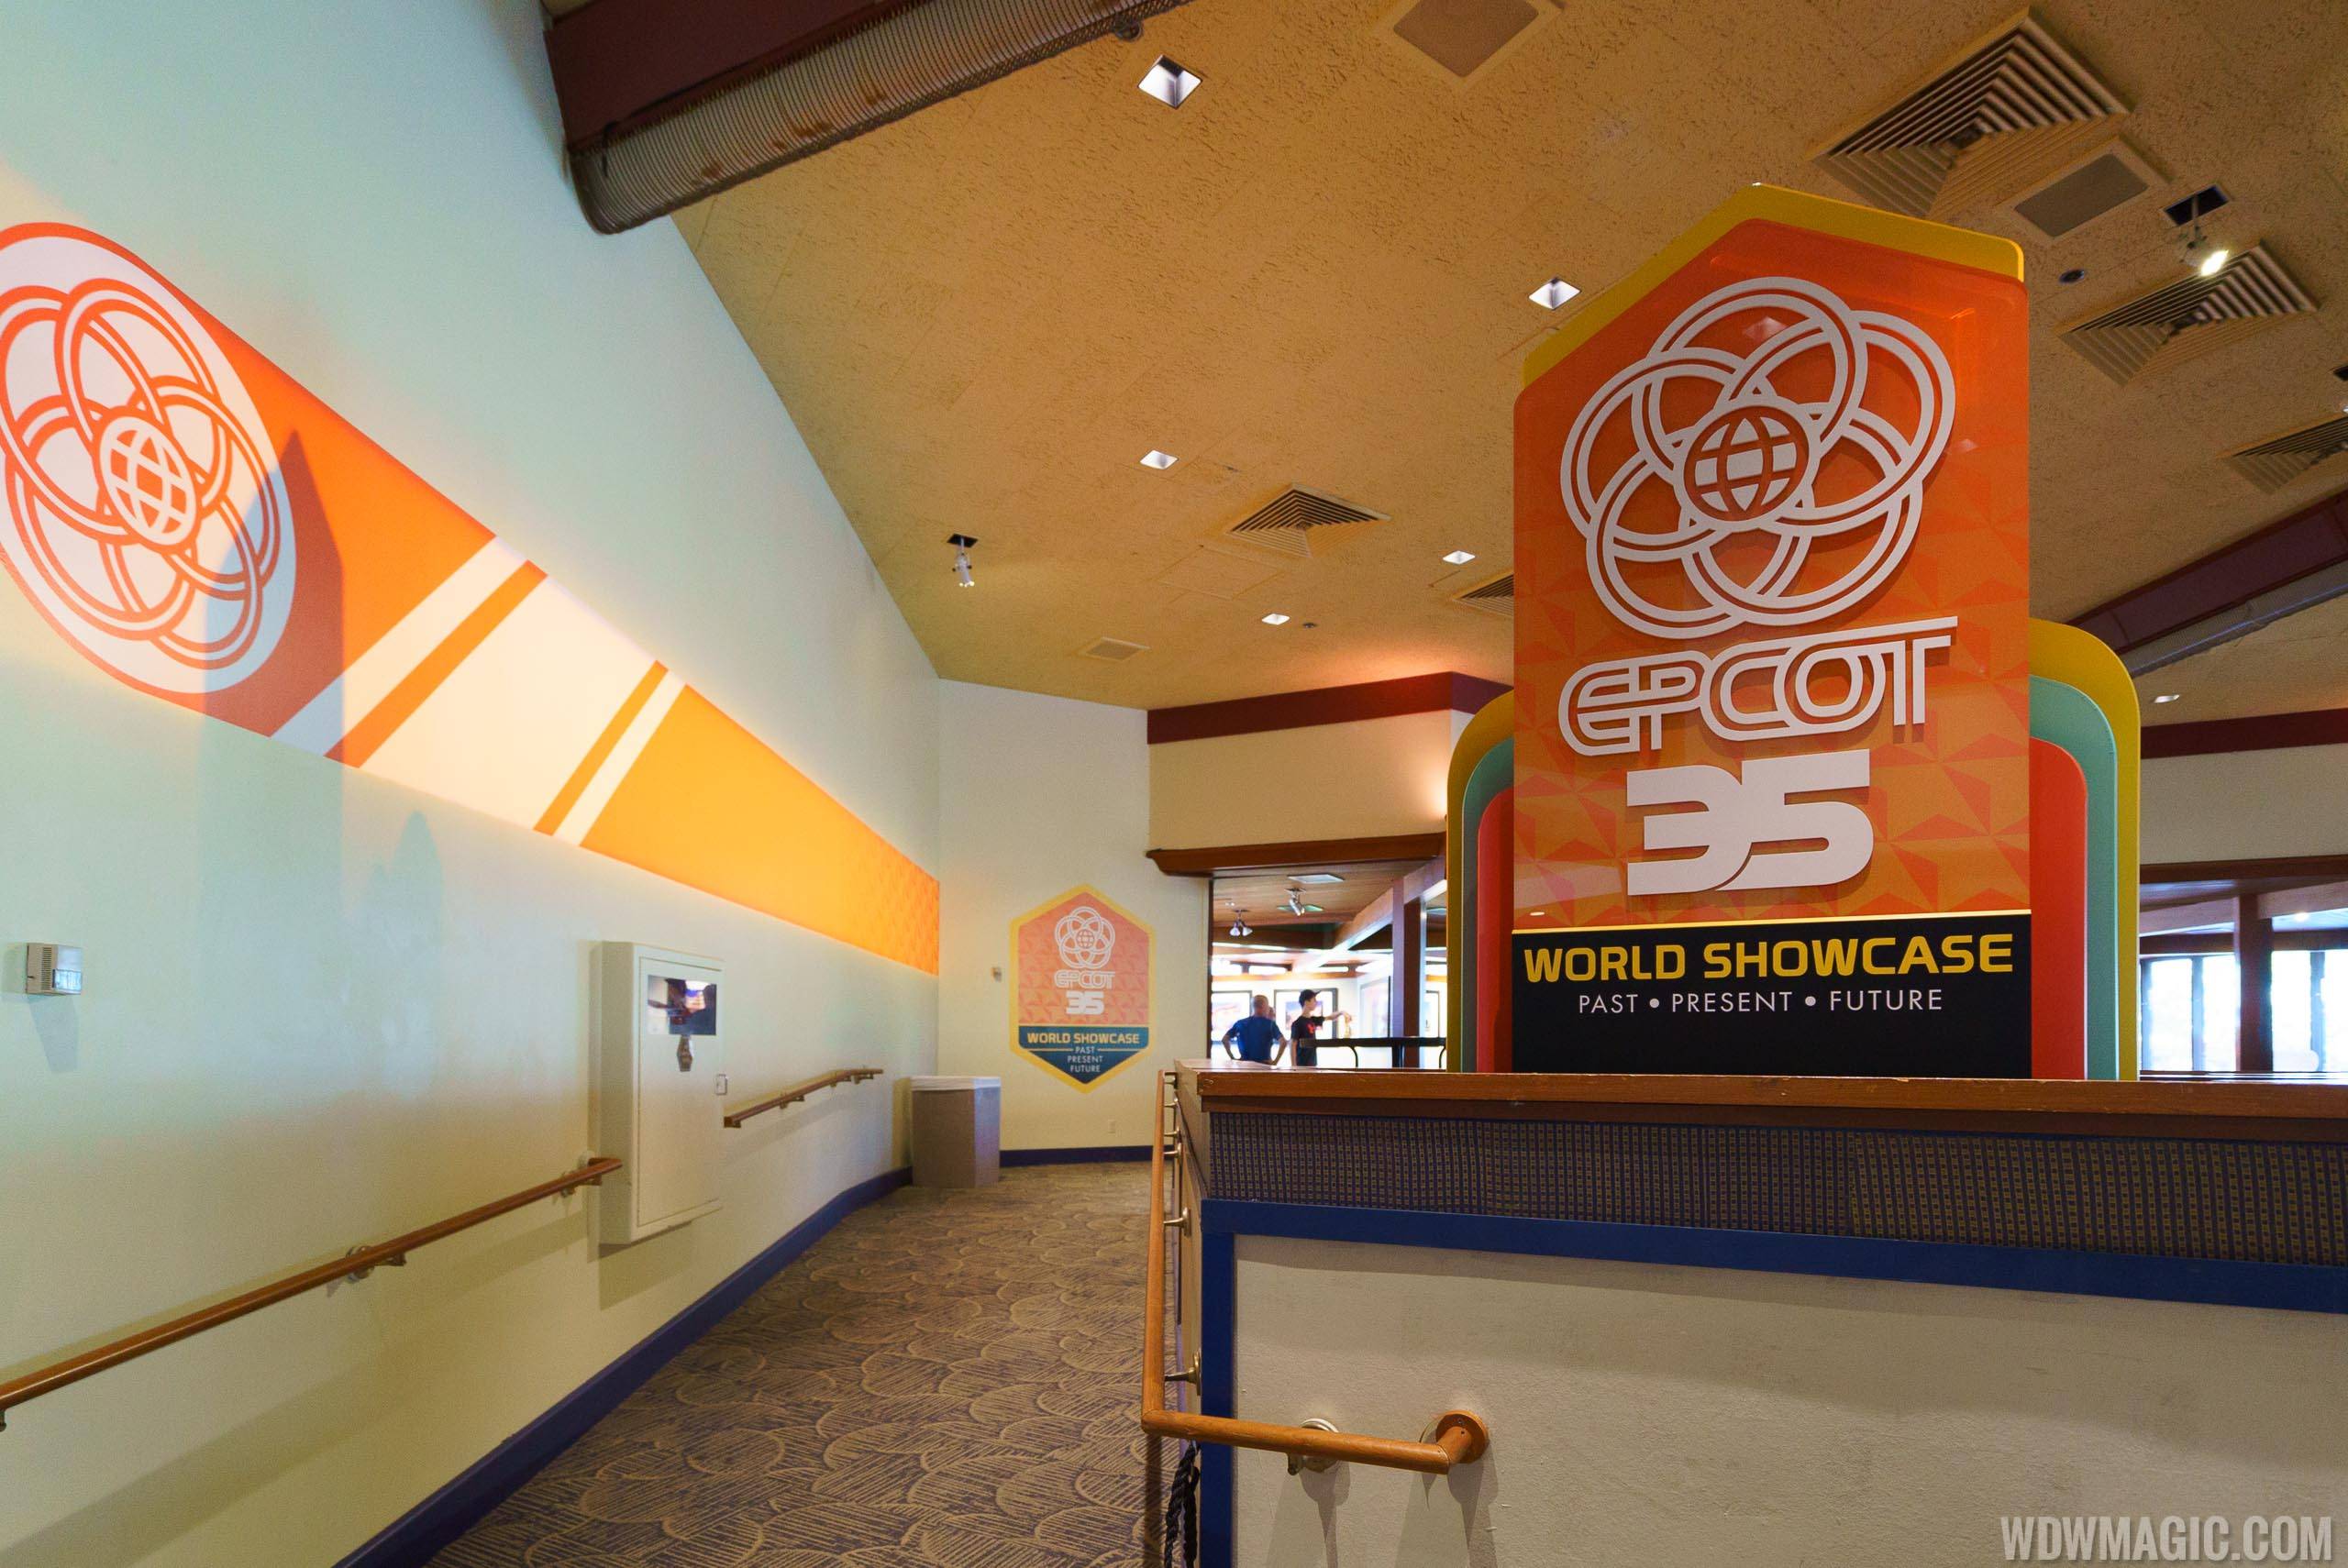 PHOTOS - Epcot Legacy Showplace opens as part of Epcot Food and Wine Festival